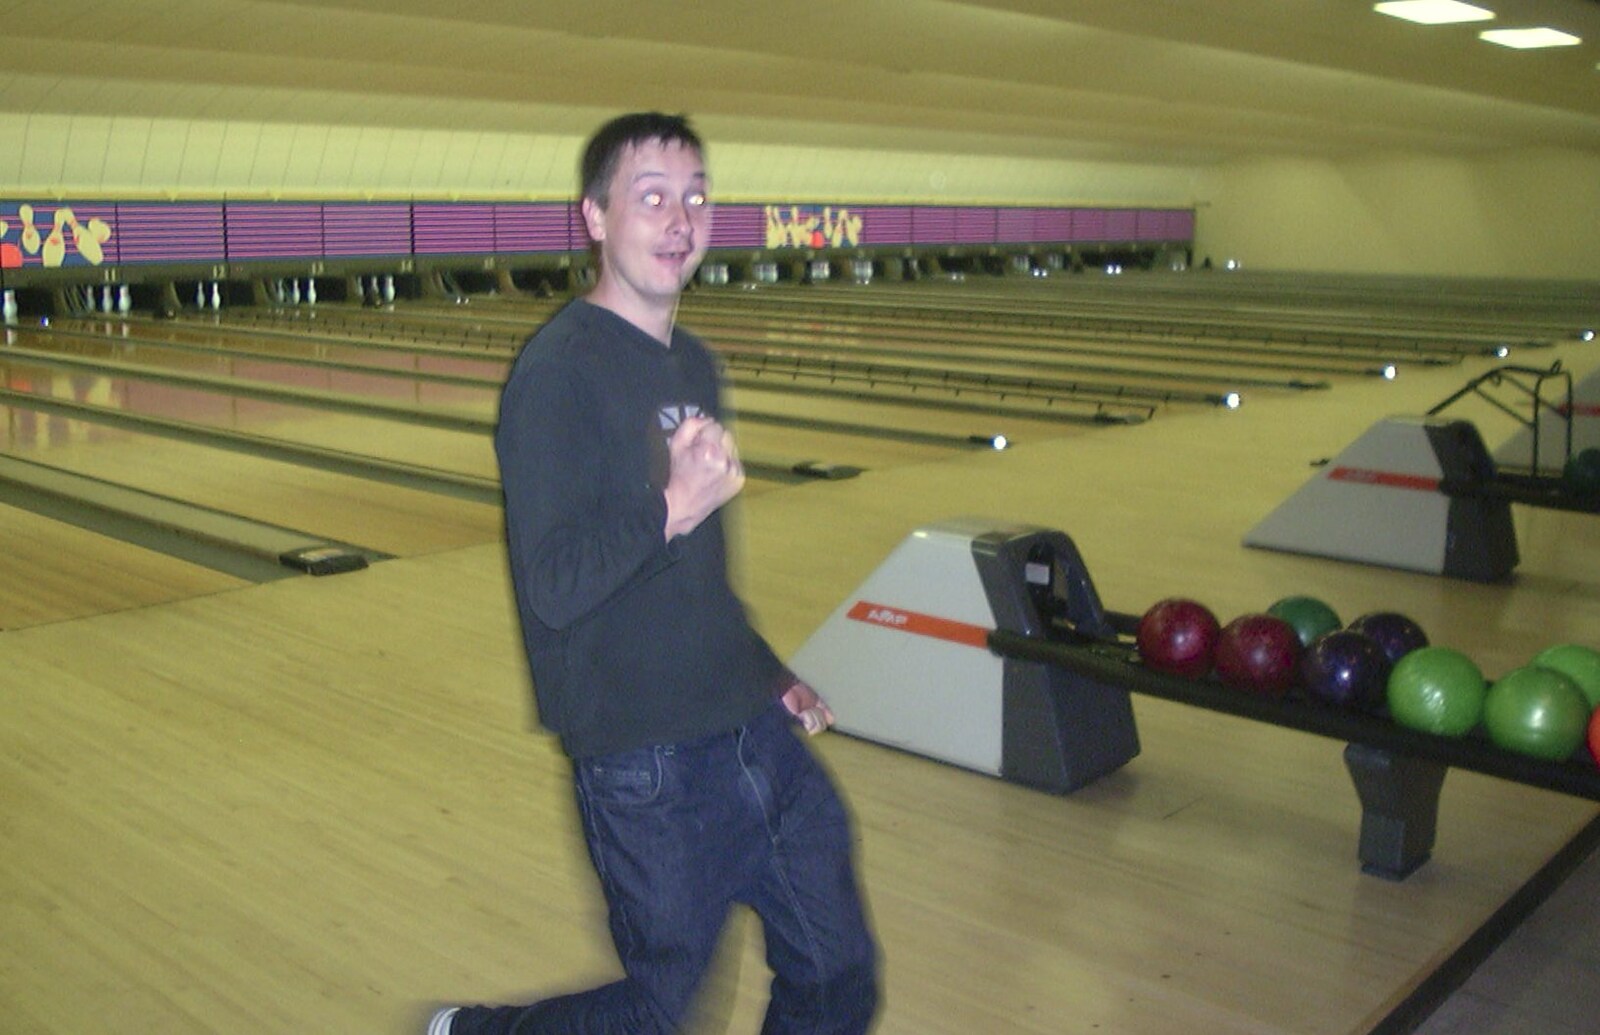 BSCC Bike Rides and Ten-Pin Bowling, Thornham and Norwich - 18th September 2004: Andrew gets a score